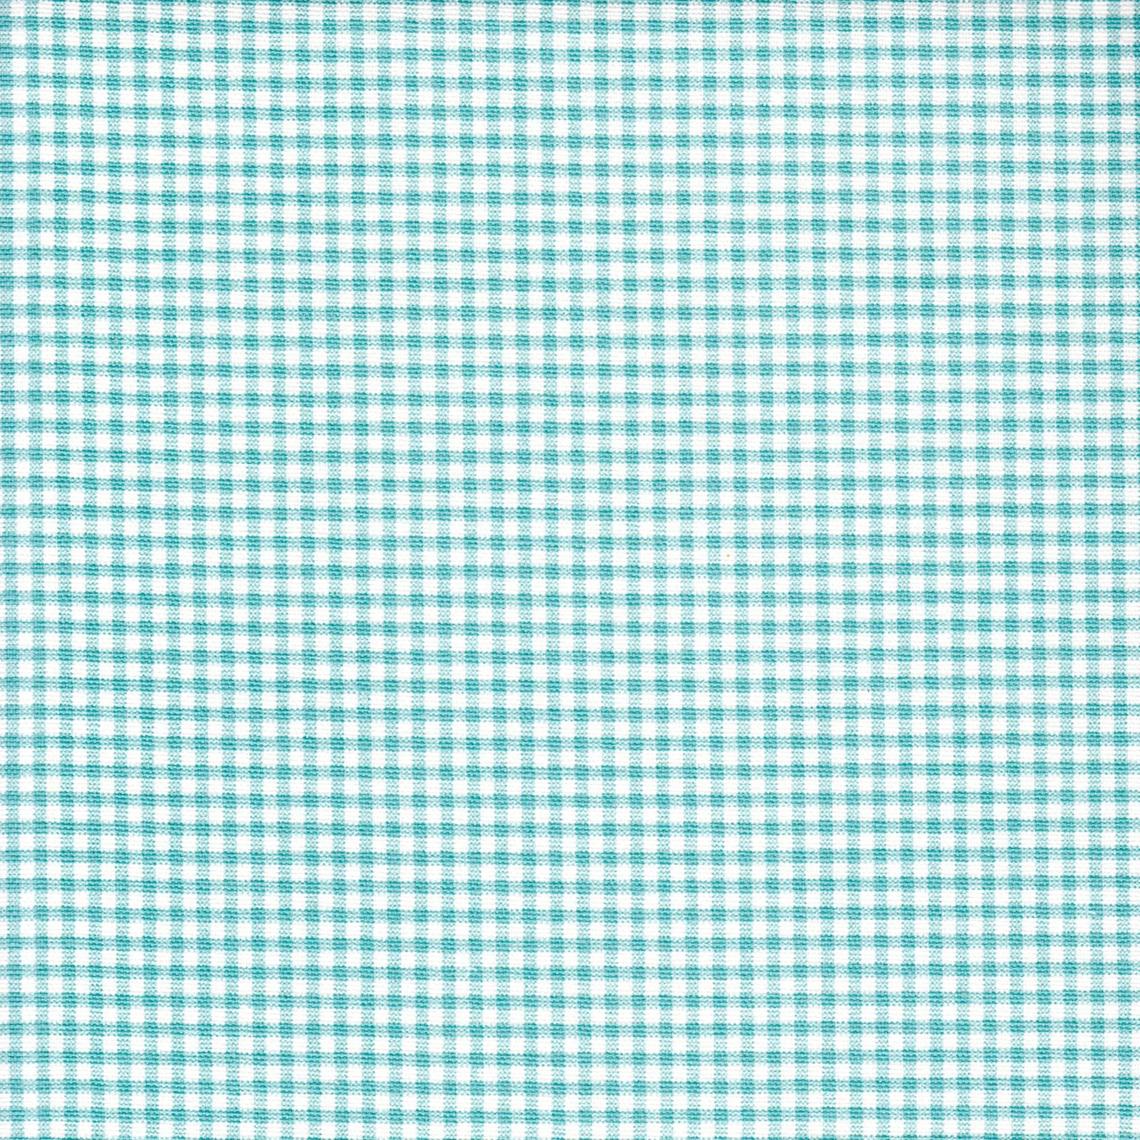 pinch pleated curtain panels pair in farmhouse turquoise blue gingham check on cream